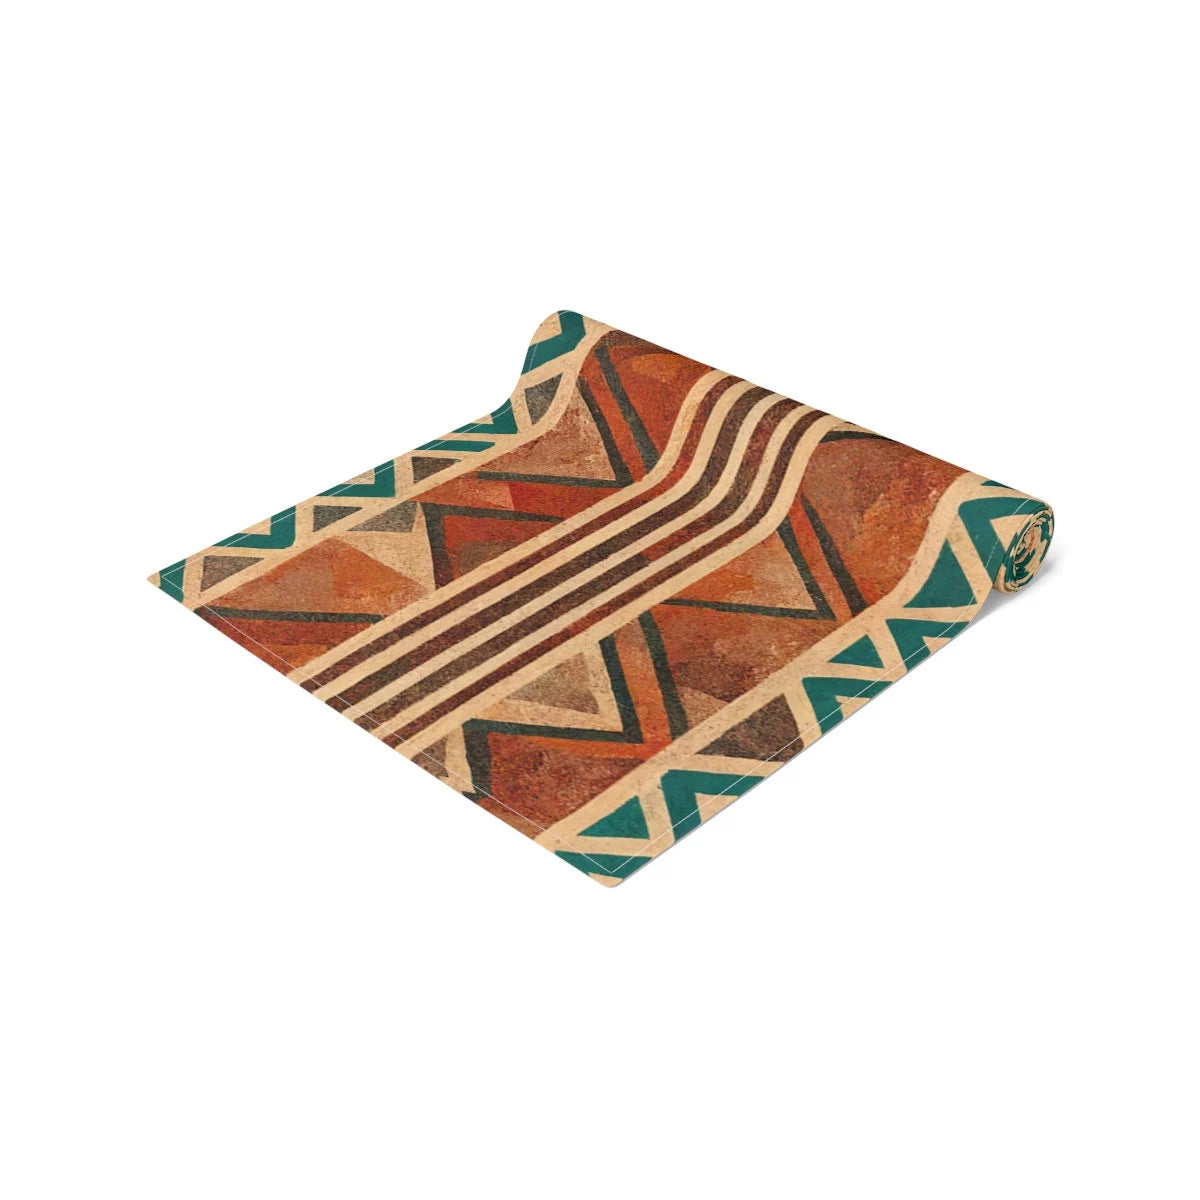 Aztec Table Runner for Stylish Dining